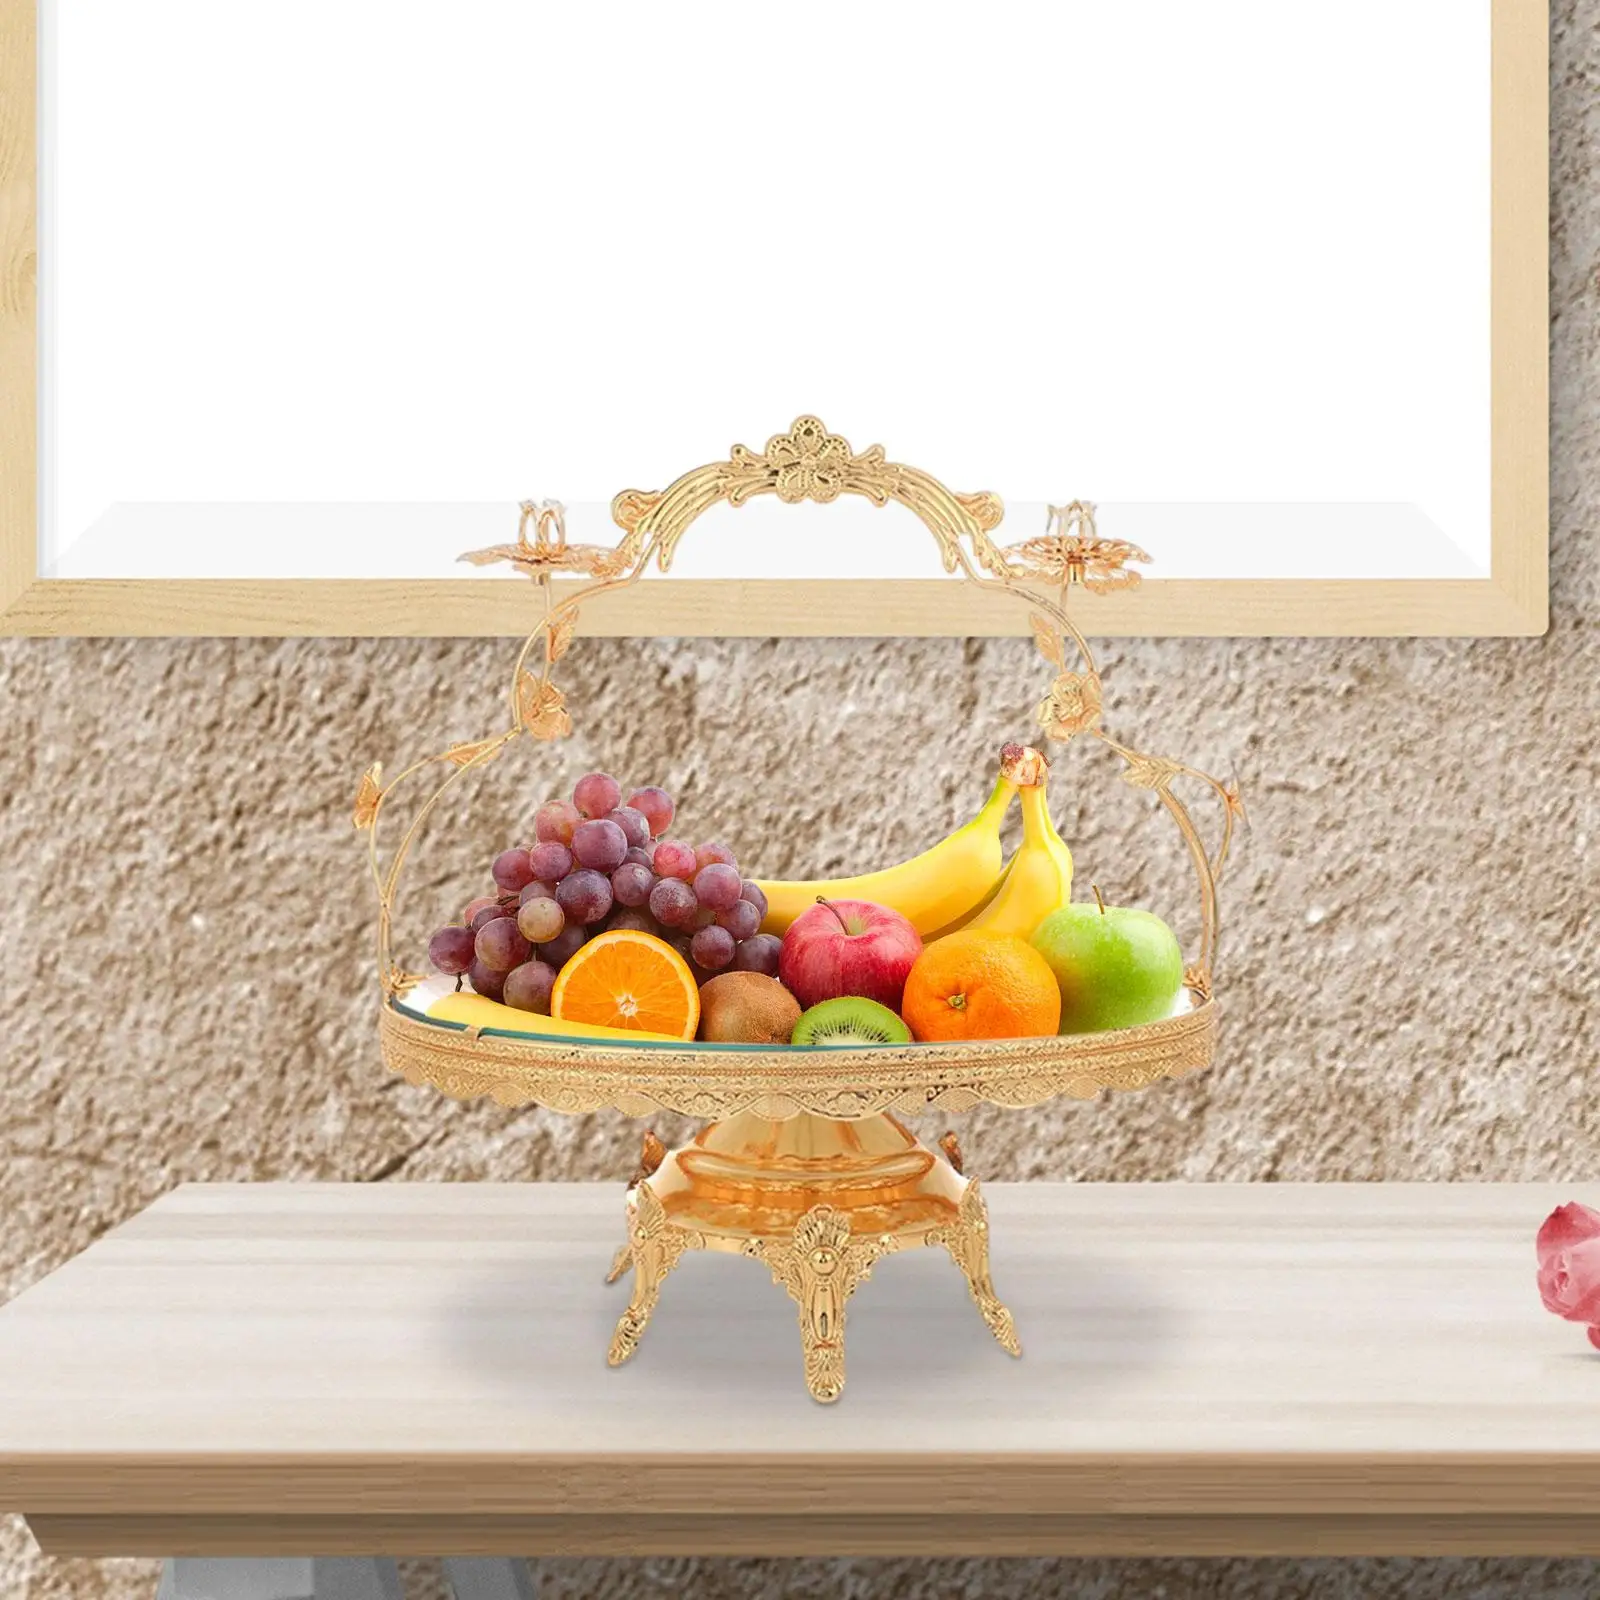 Fruit Tray with Handle Dessert Ornament Tray Cupcake Dessert Plate Serving Tray for Home Countertop Holiday Centerpiece Kitchen